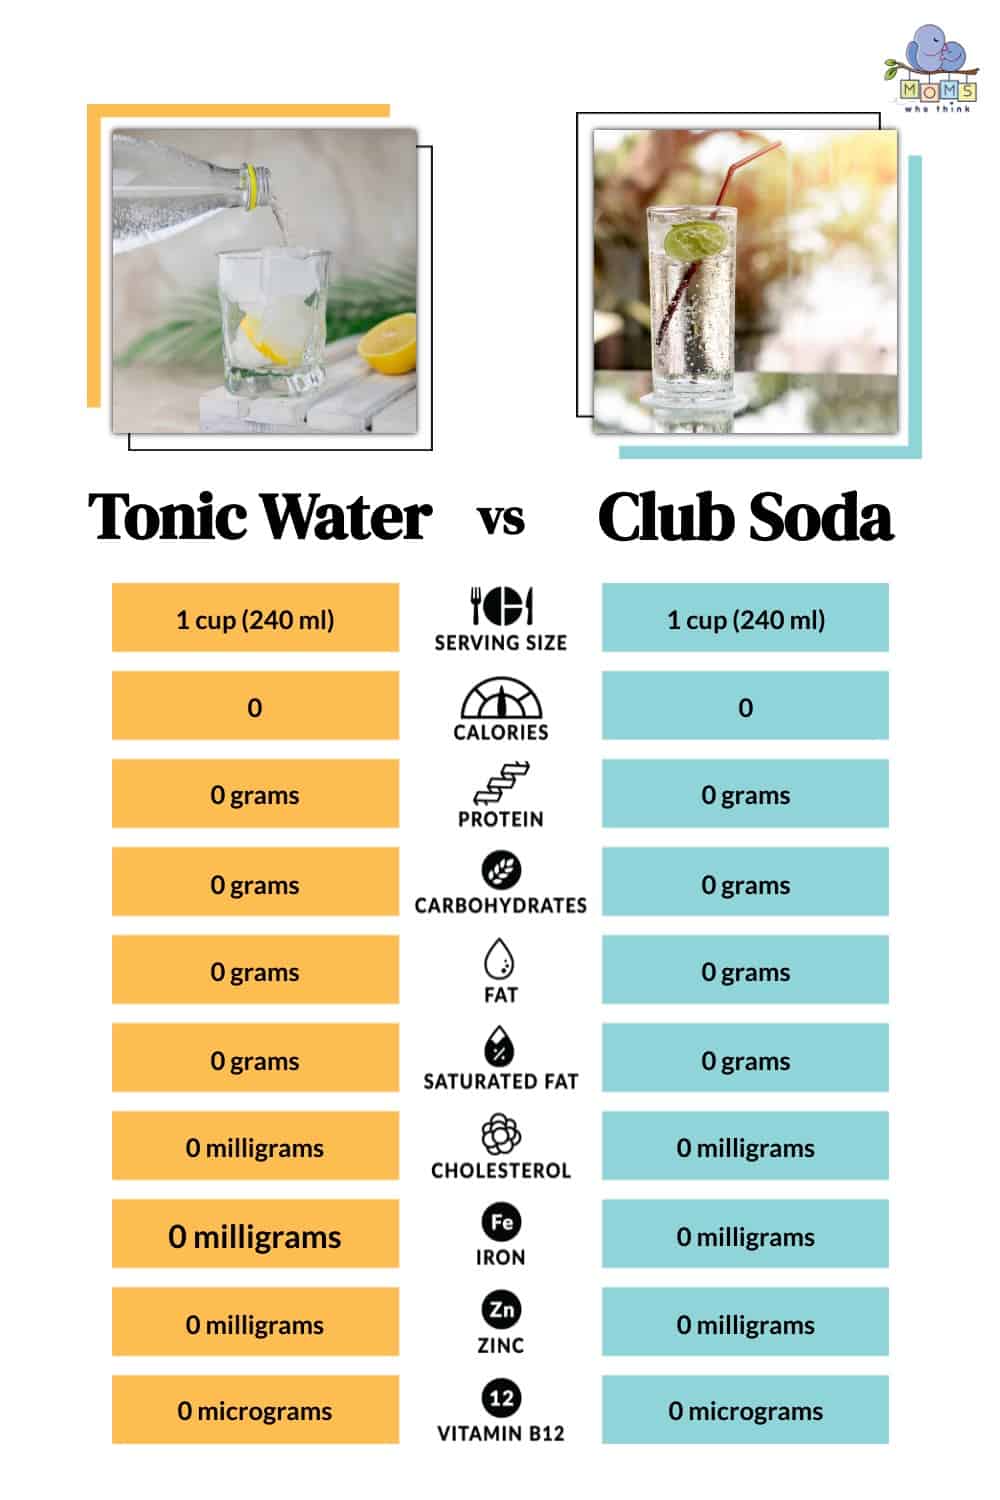 Tonic Water vs Club Soda Nutritional Facts